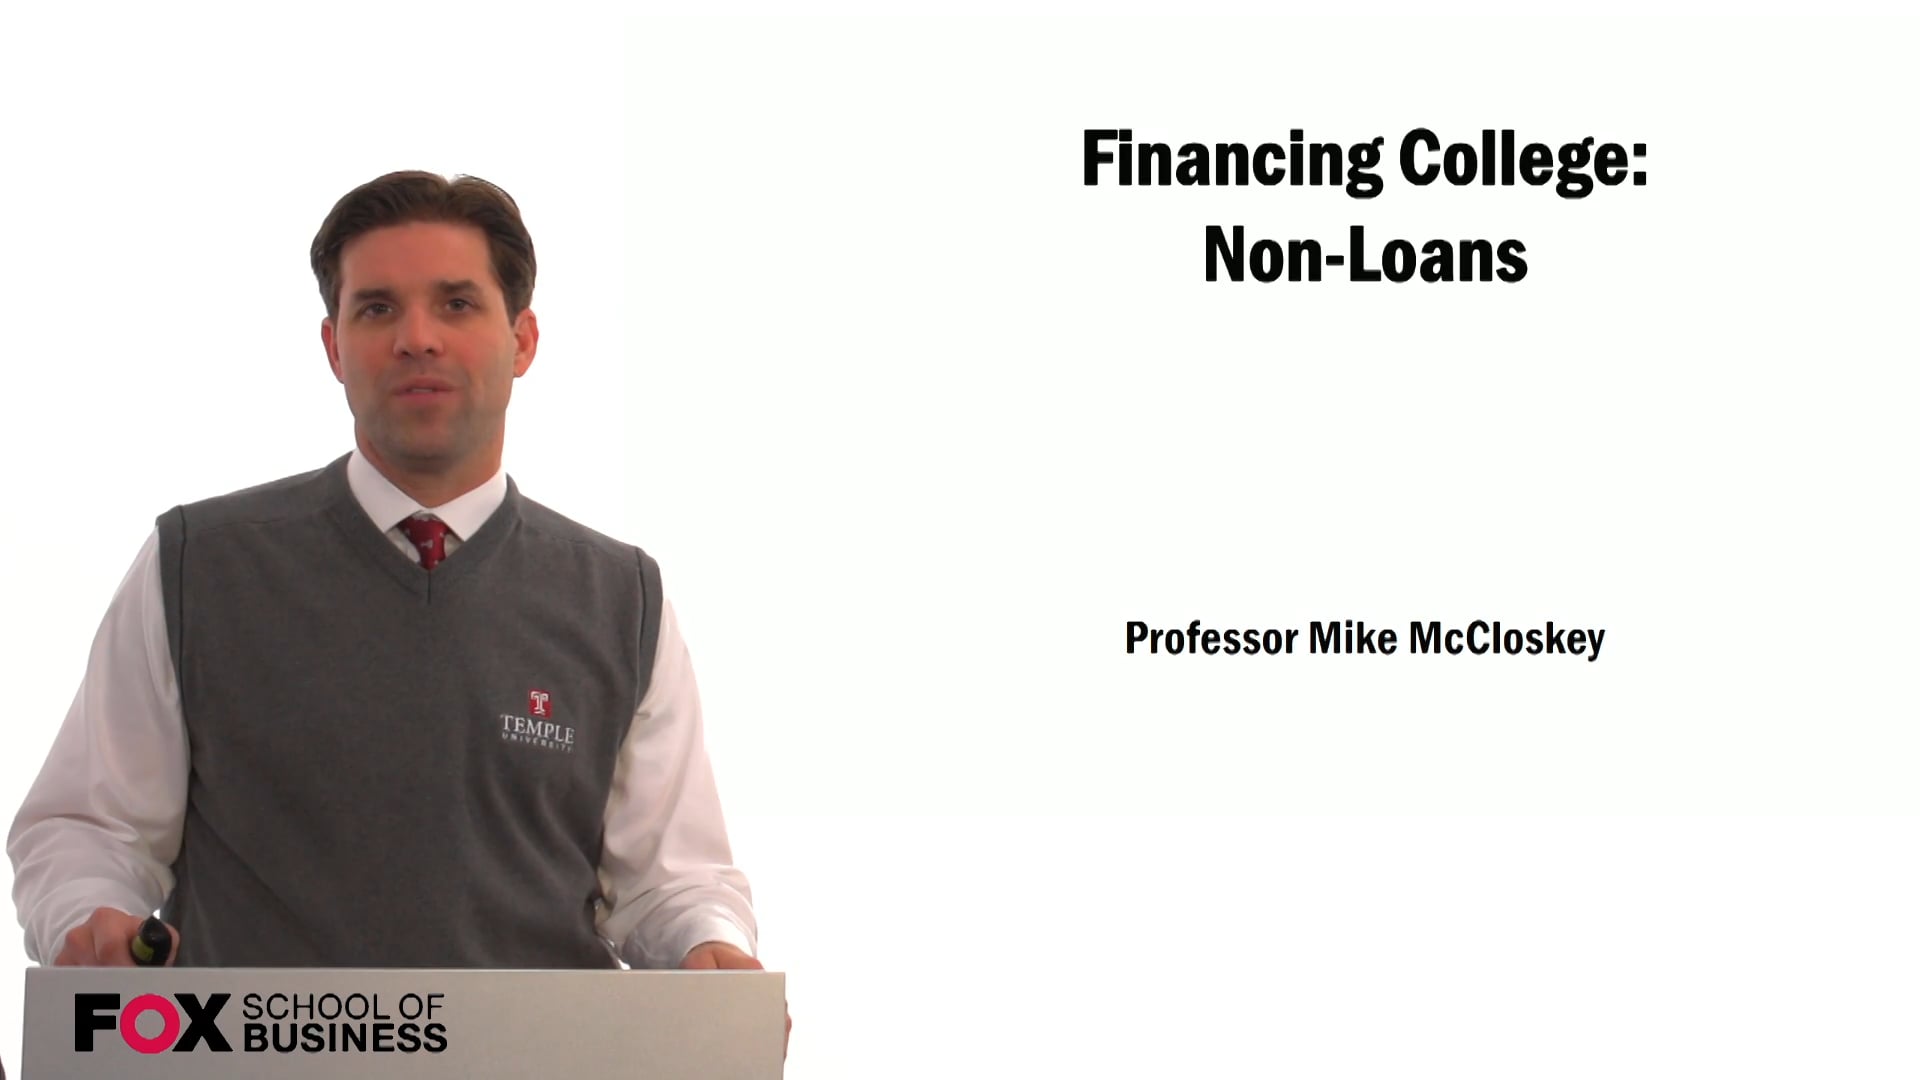 Financing College Non-Loans